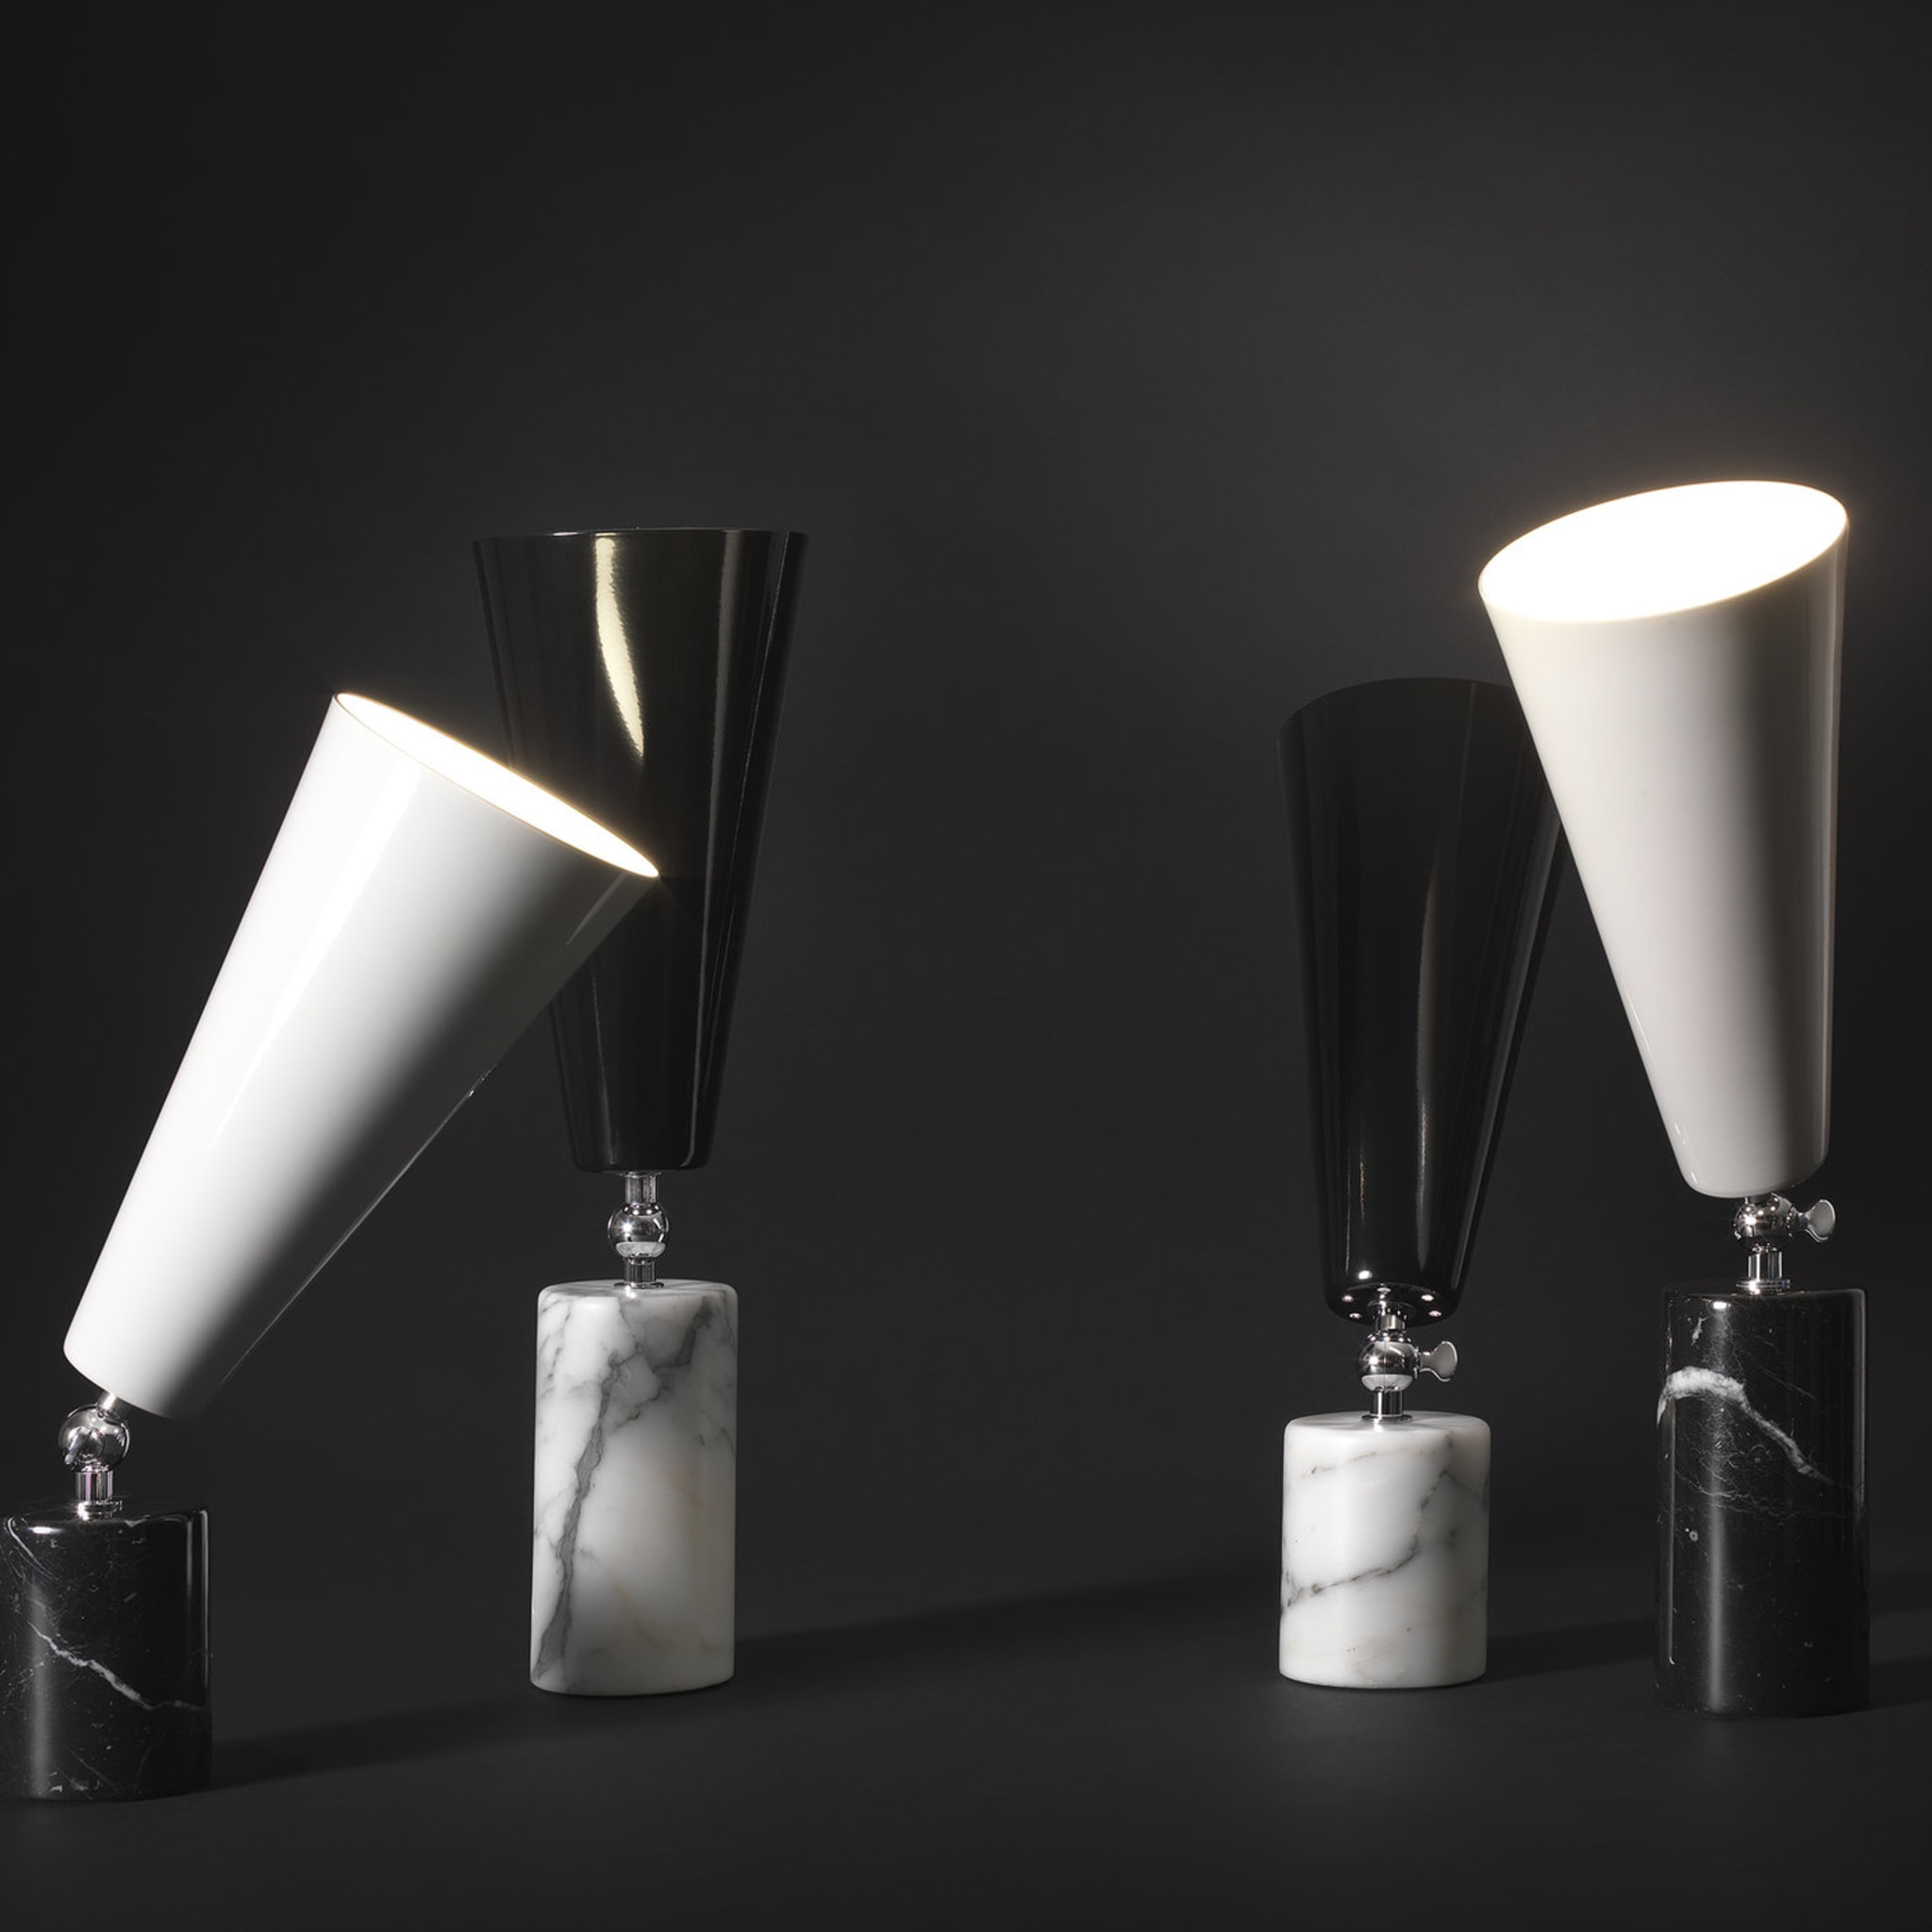 Vox Alta Table Lamp by Lorenza Bozzoli in Marquina Marble - Alternative view 1